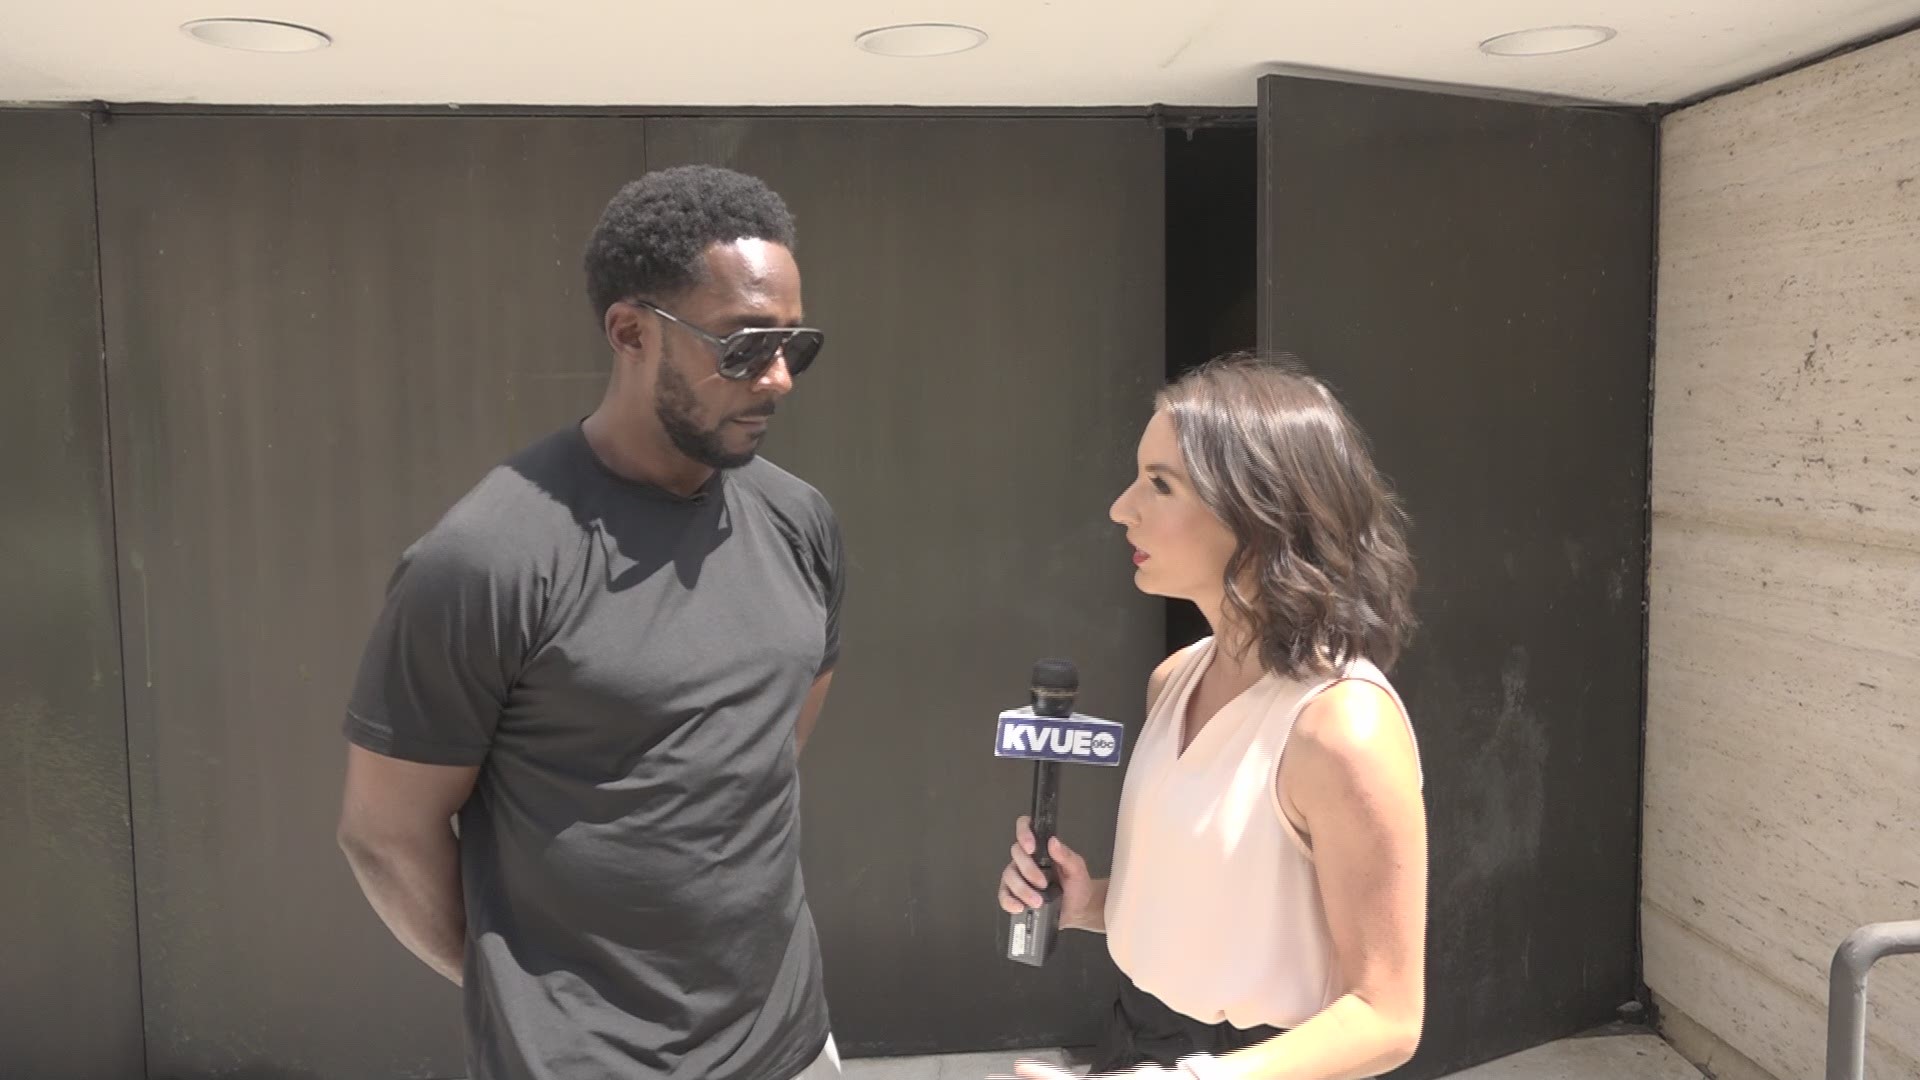 KVUE's Emily Giangreco caught up with ESPN's Desmond Howard about his thoughts on the Texas-LSU game.